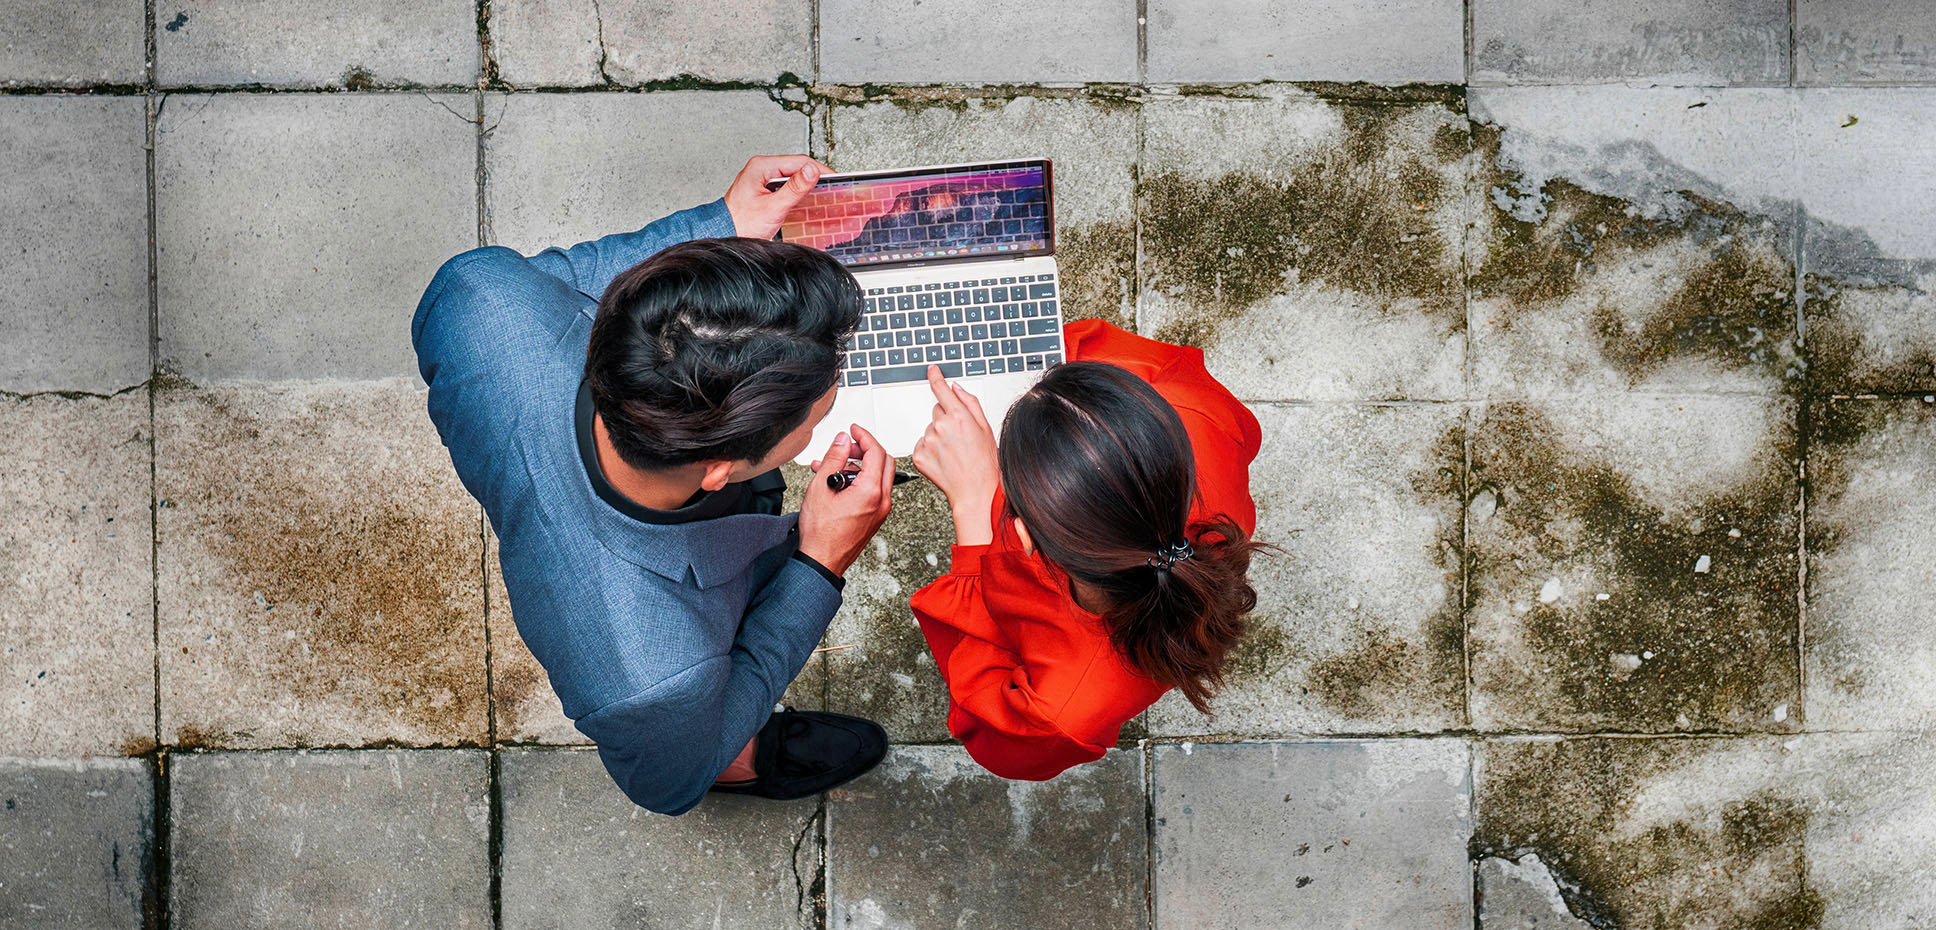 An overhead image of a businessman and woman holding a laptop